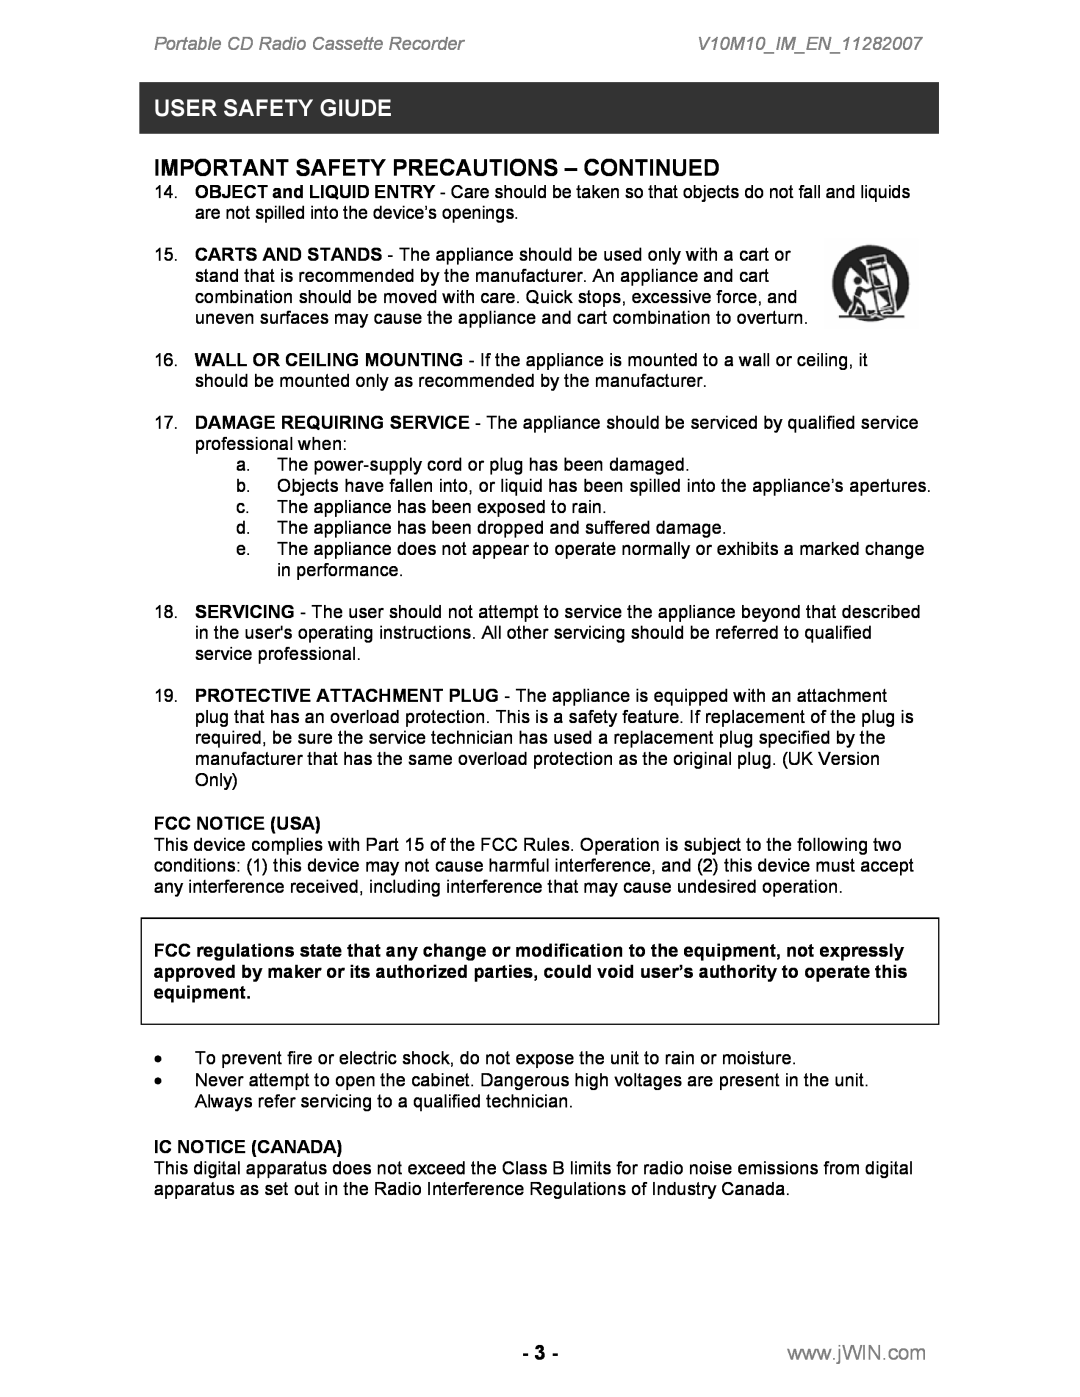 Jwin JX-CD483 Important Safety Precautions - Continued, Fcc Notice Usa, Ic Notice Canada, User Safety Giude 